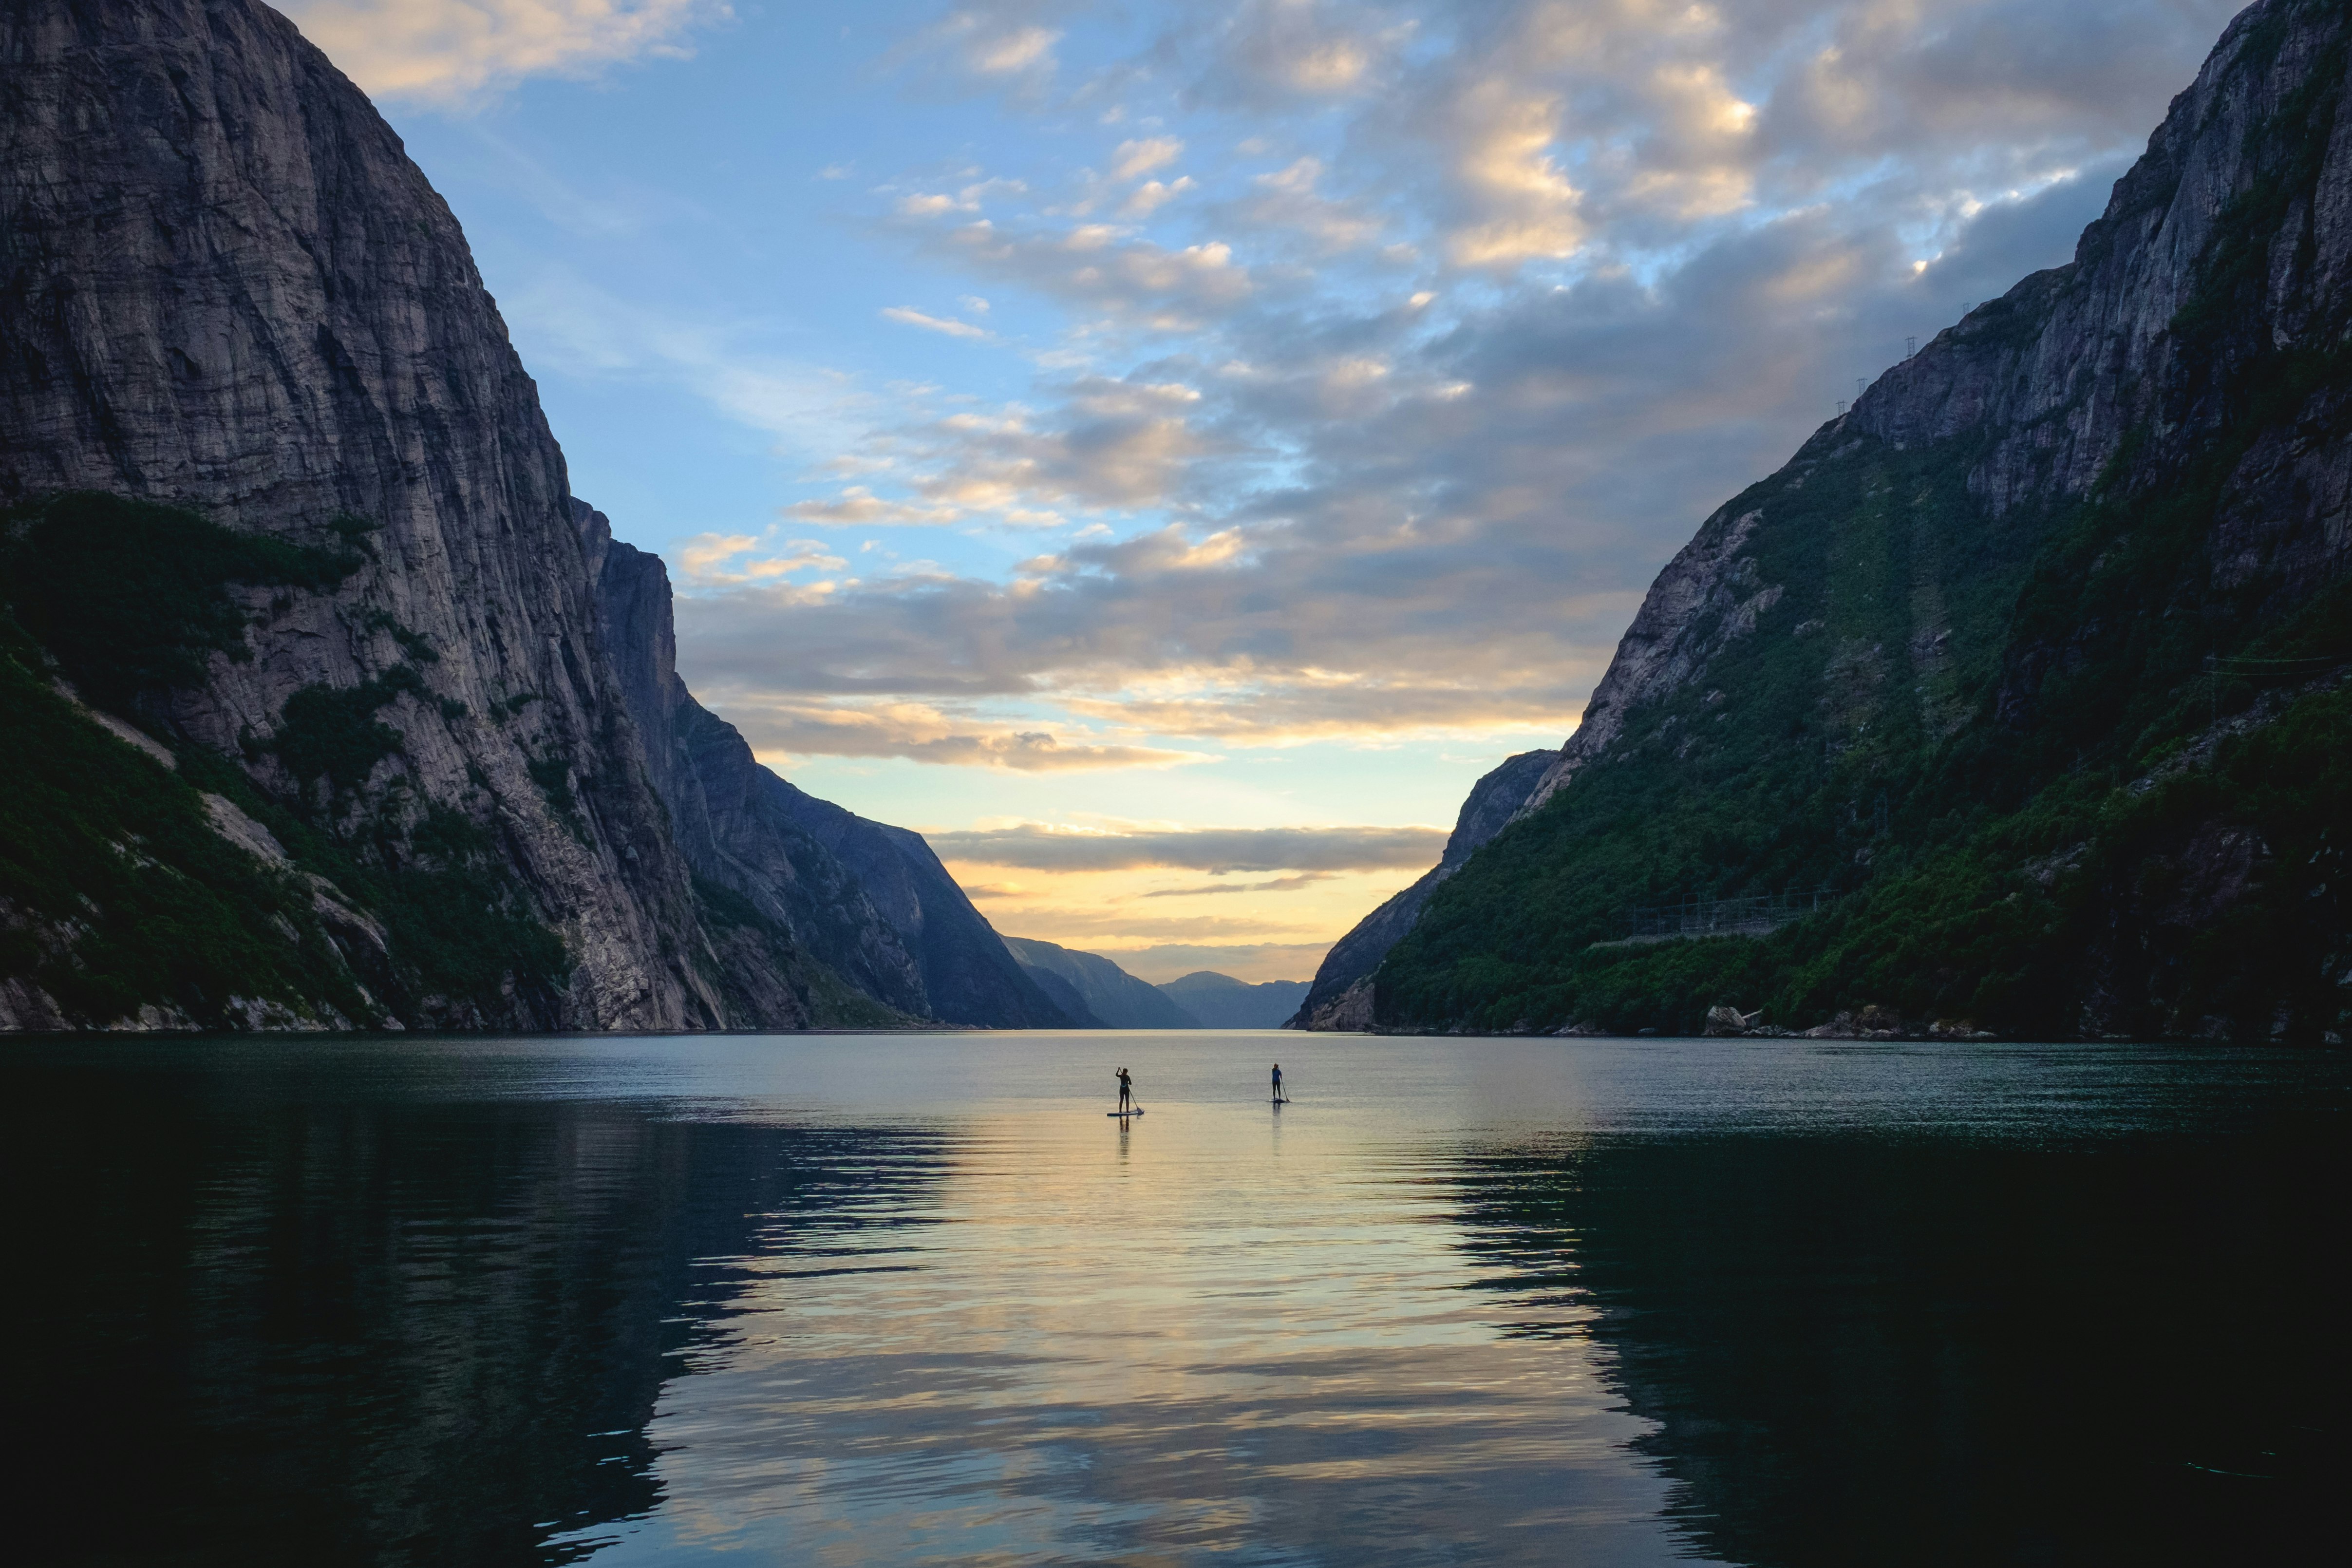 Scenic View Of Fjord By Mountains Against Sky with two paddle boarders punting up the middle; places to go stand up paddle boarding